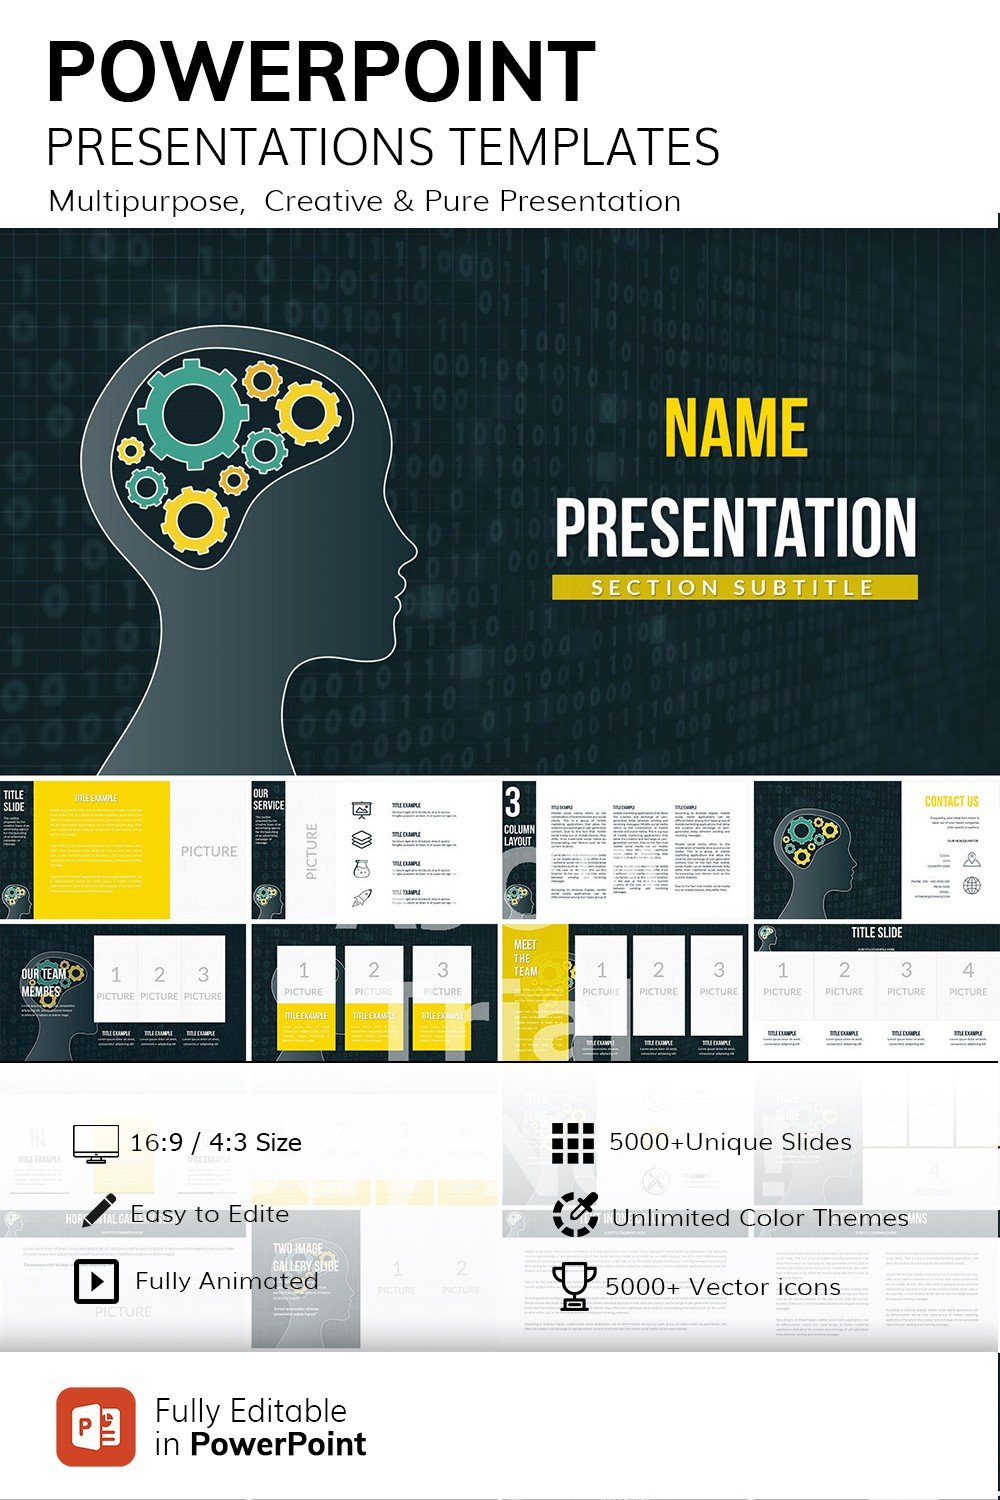 how to make a master slide on powerpoint 2010